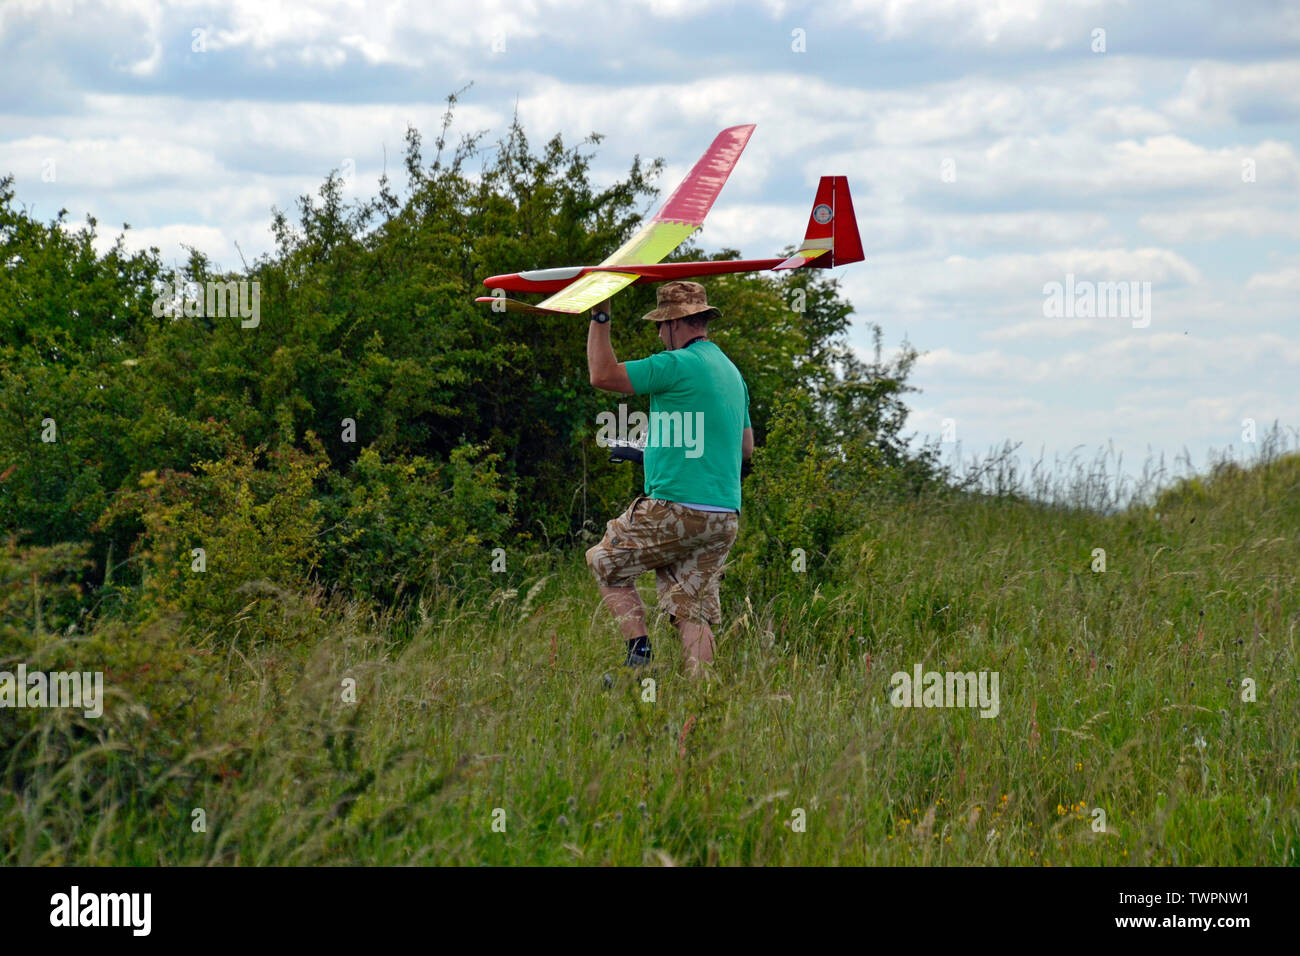 Man with a model aircraft glider at Ivinghoe Beacon, Ashridge Estate, Ivinghoe, Buckinghamshire, Chilterns, UK Stock Photo